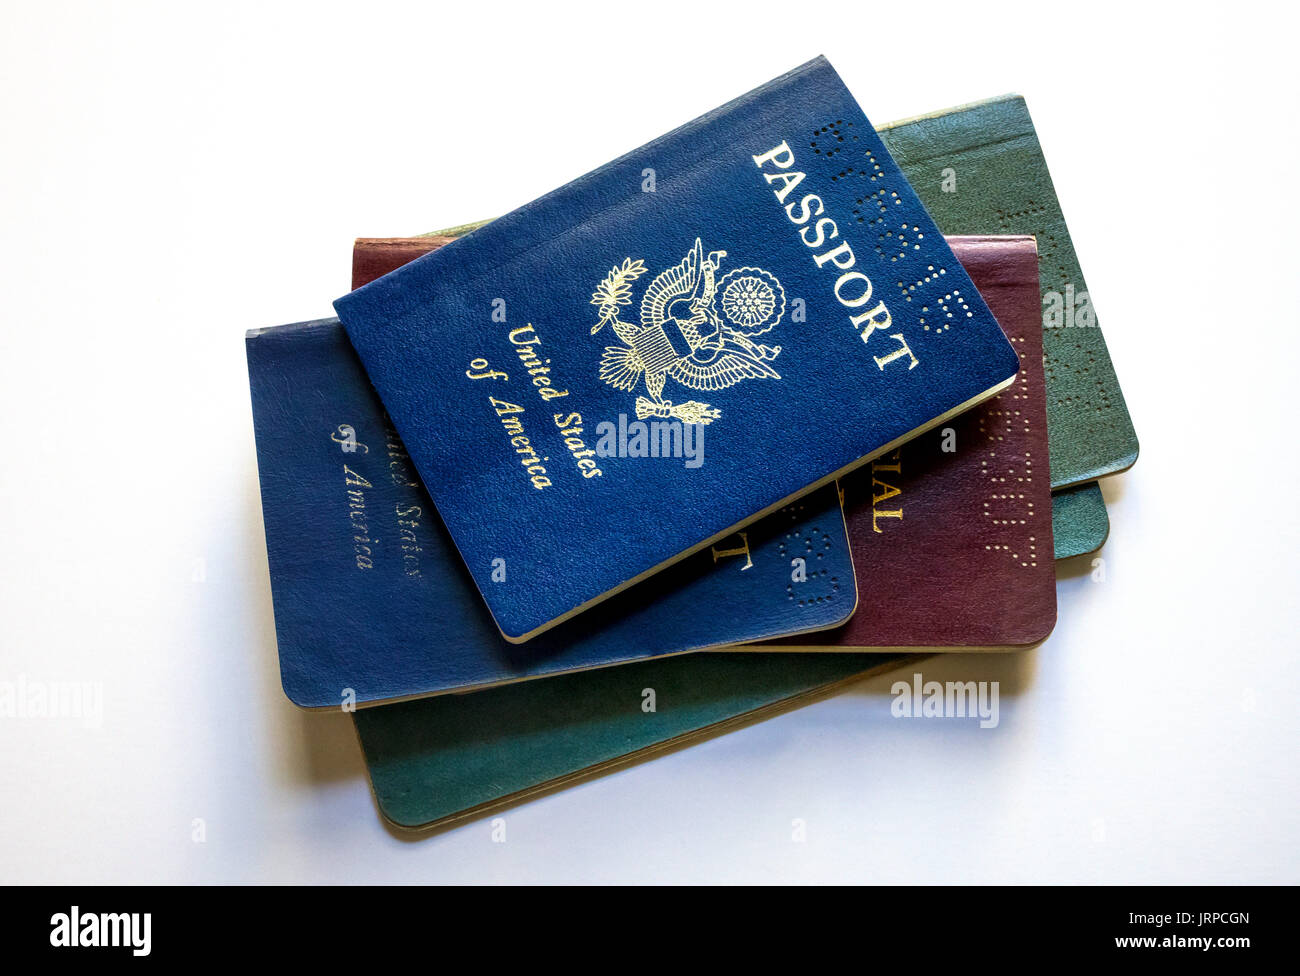 A stack of expired US passports against a white background Stock Photo